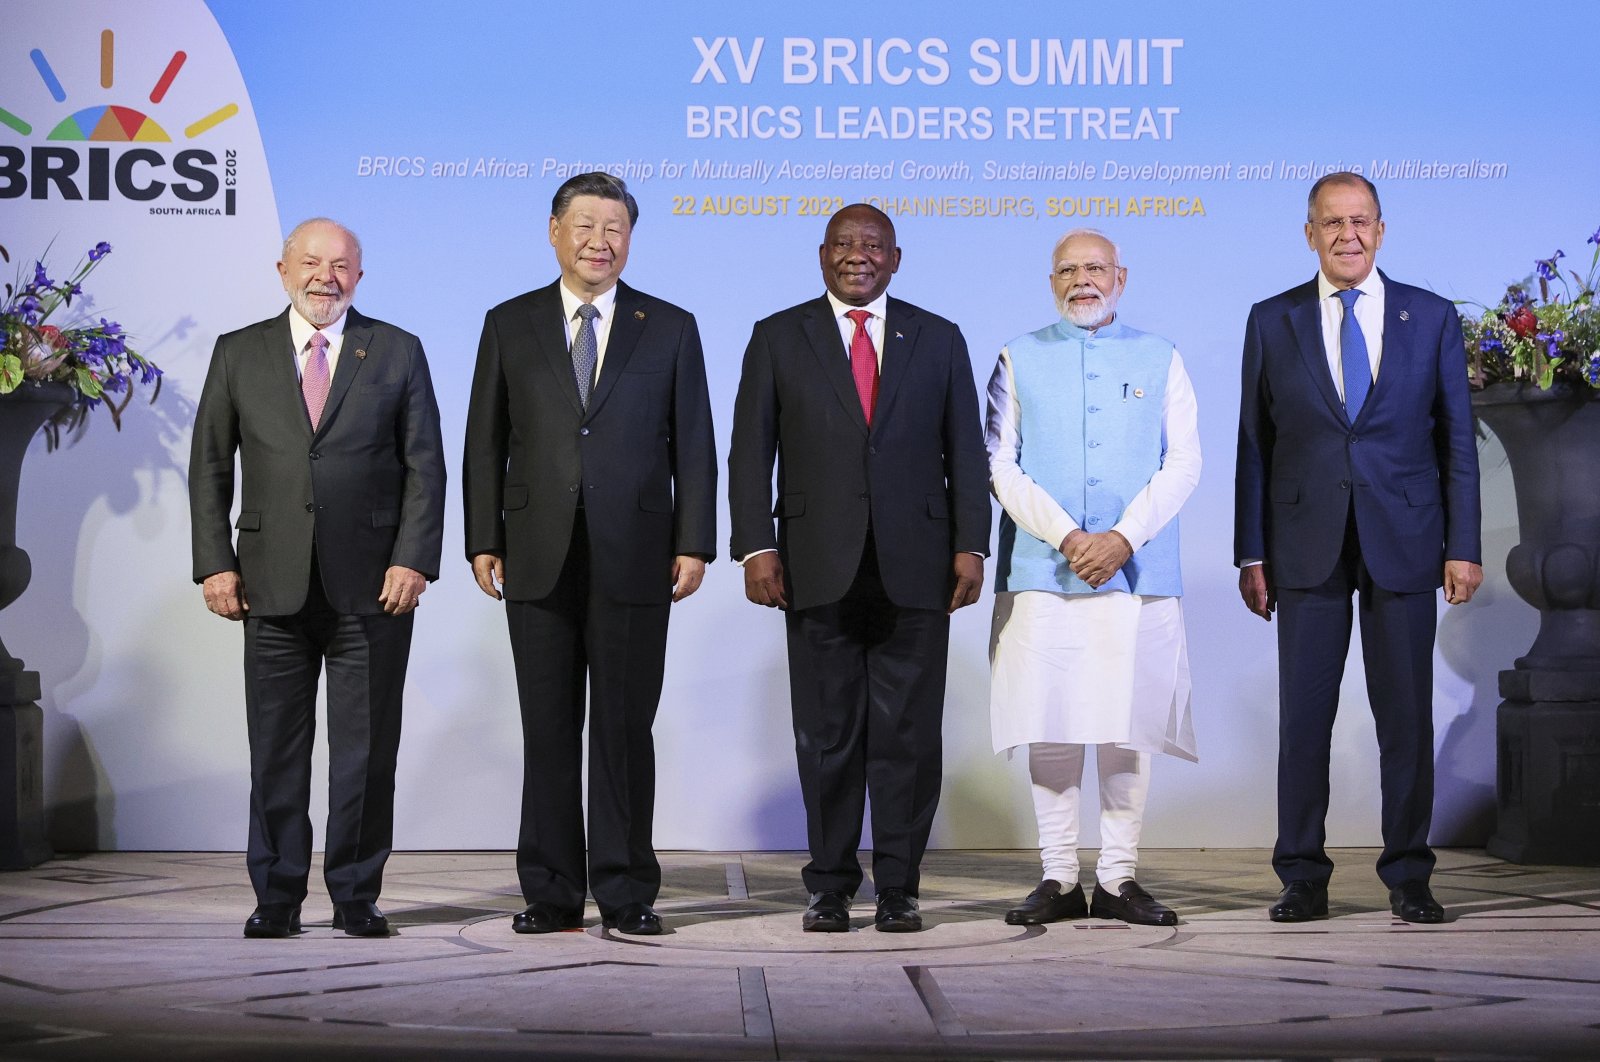 From L to R: Brazilian President Luiz Inacio Lula da Silva, Chinese President Xi Jinping, South African President Cyril Ramaphosa, Indian Prime Minister Narendra Modi and Russian Foreign Minister Sergey Lavrov pose for a photo on the sideline of the BRICS group of emerging economies three-day summit in Johannesburg, South Africa, Aug. 22, 2023. (AP Photo)